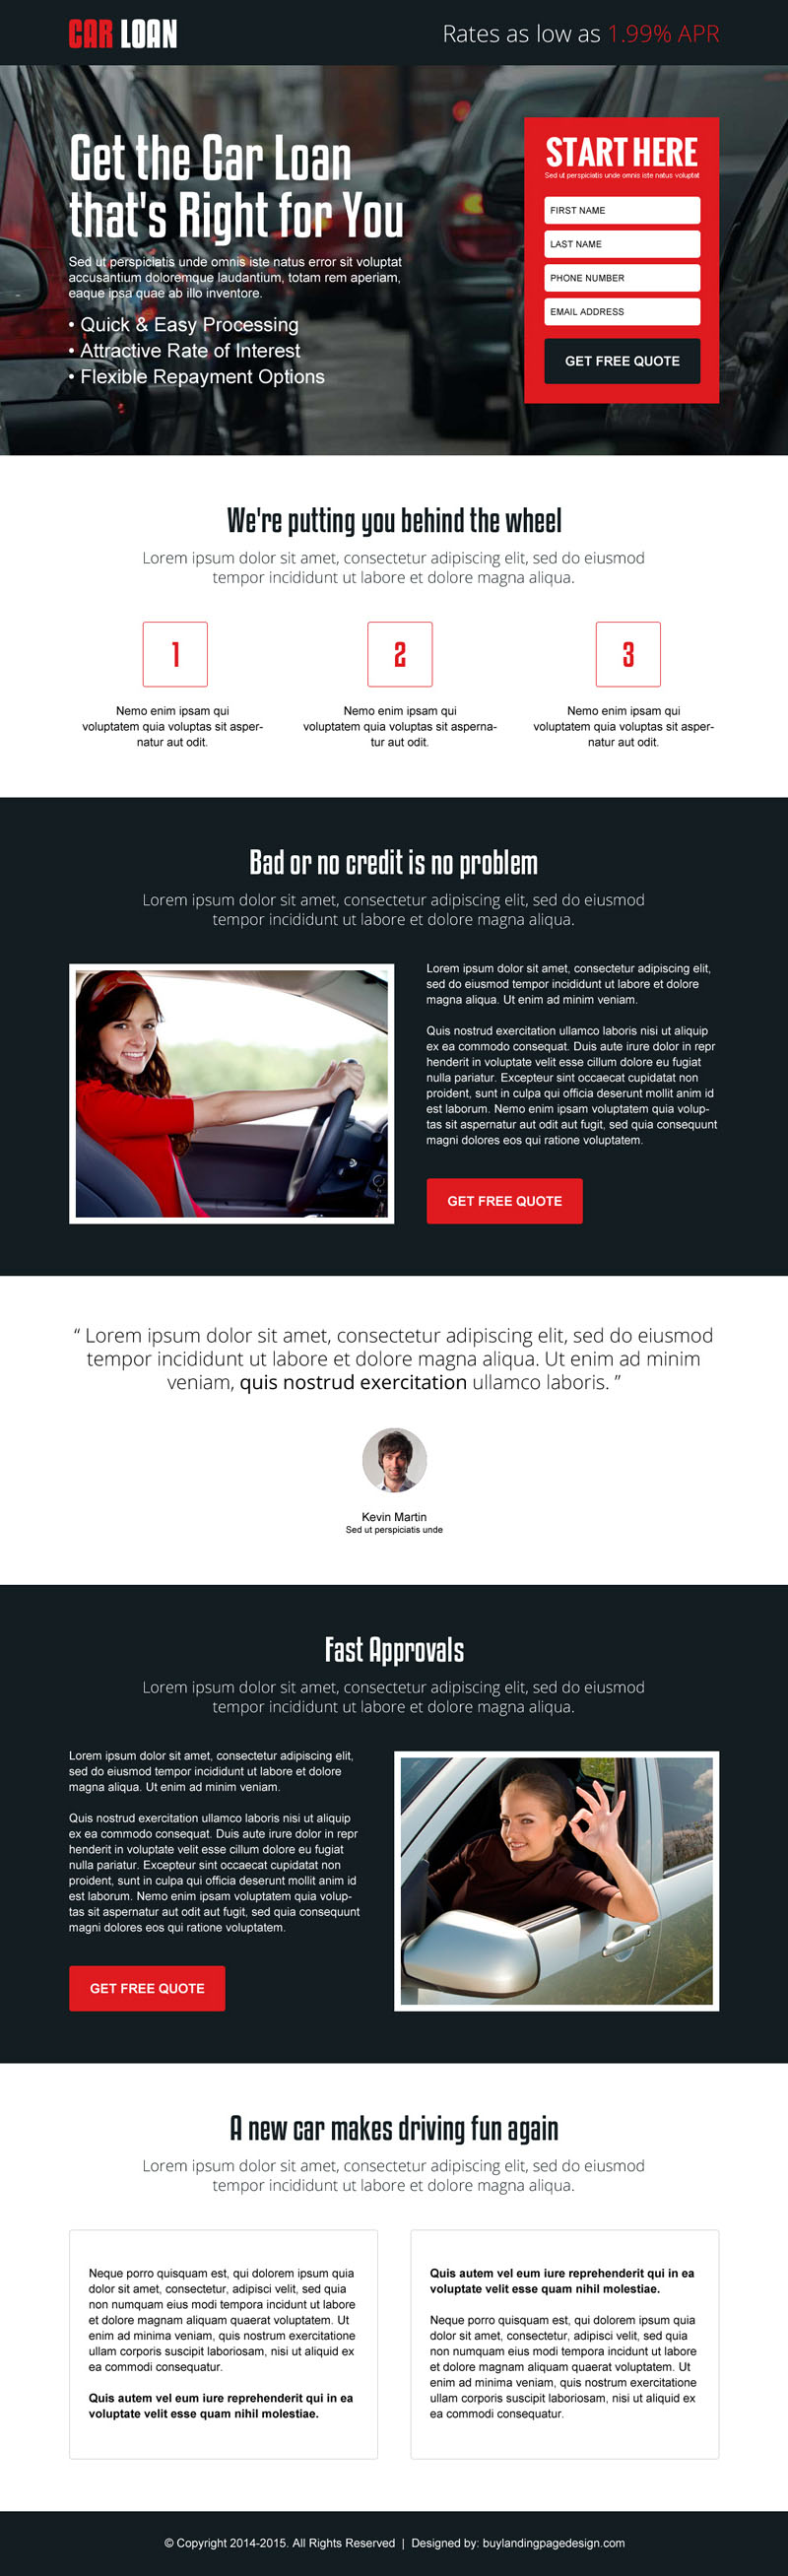 lowest-interest-rate-for-car-loan-lead-generation-converting-responsive-landing-page-design-005